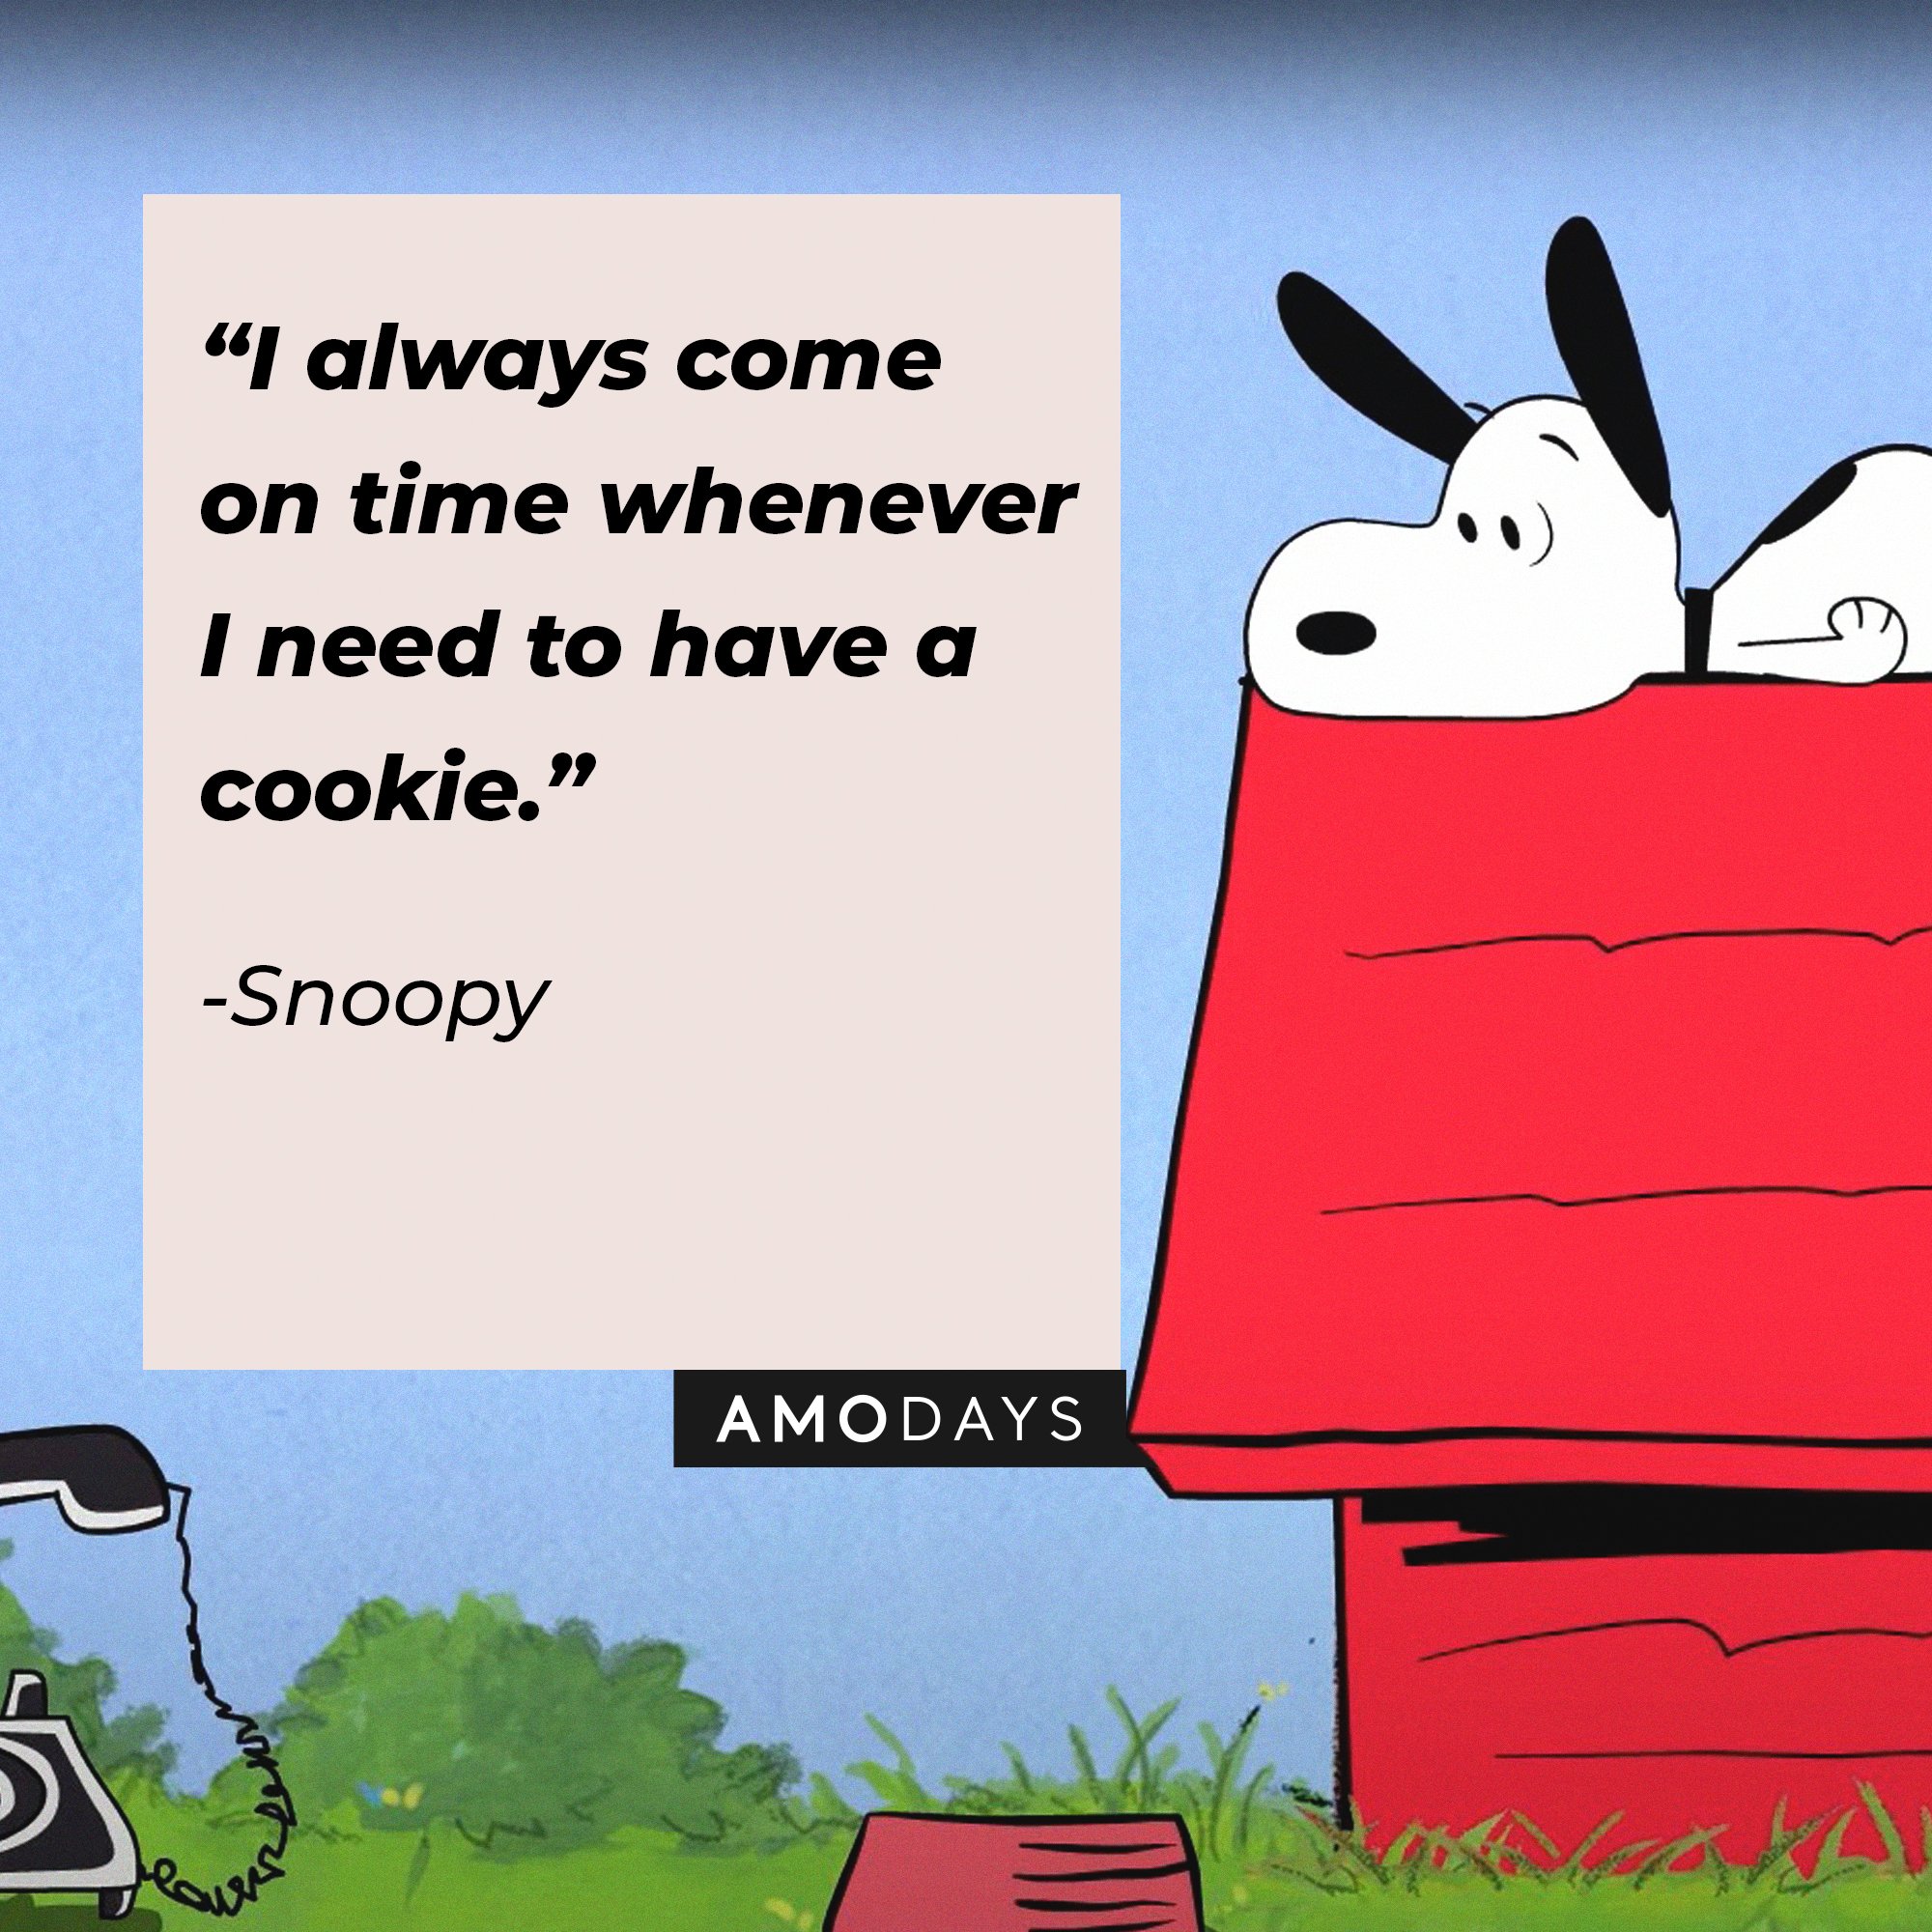 Snoopy’s quote: “I always come on time whenever I need to have a cookie.” | Image: AmoDays